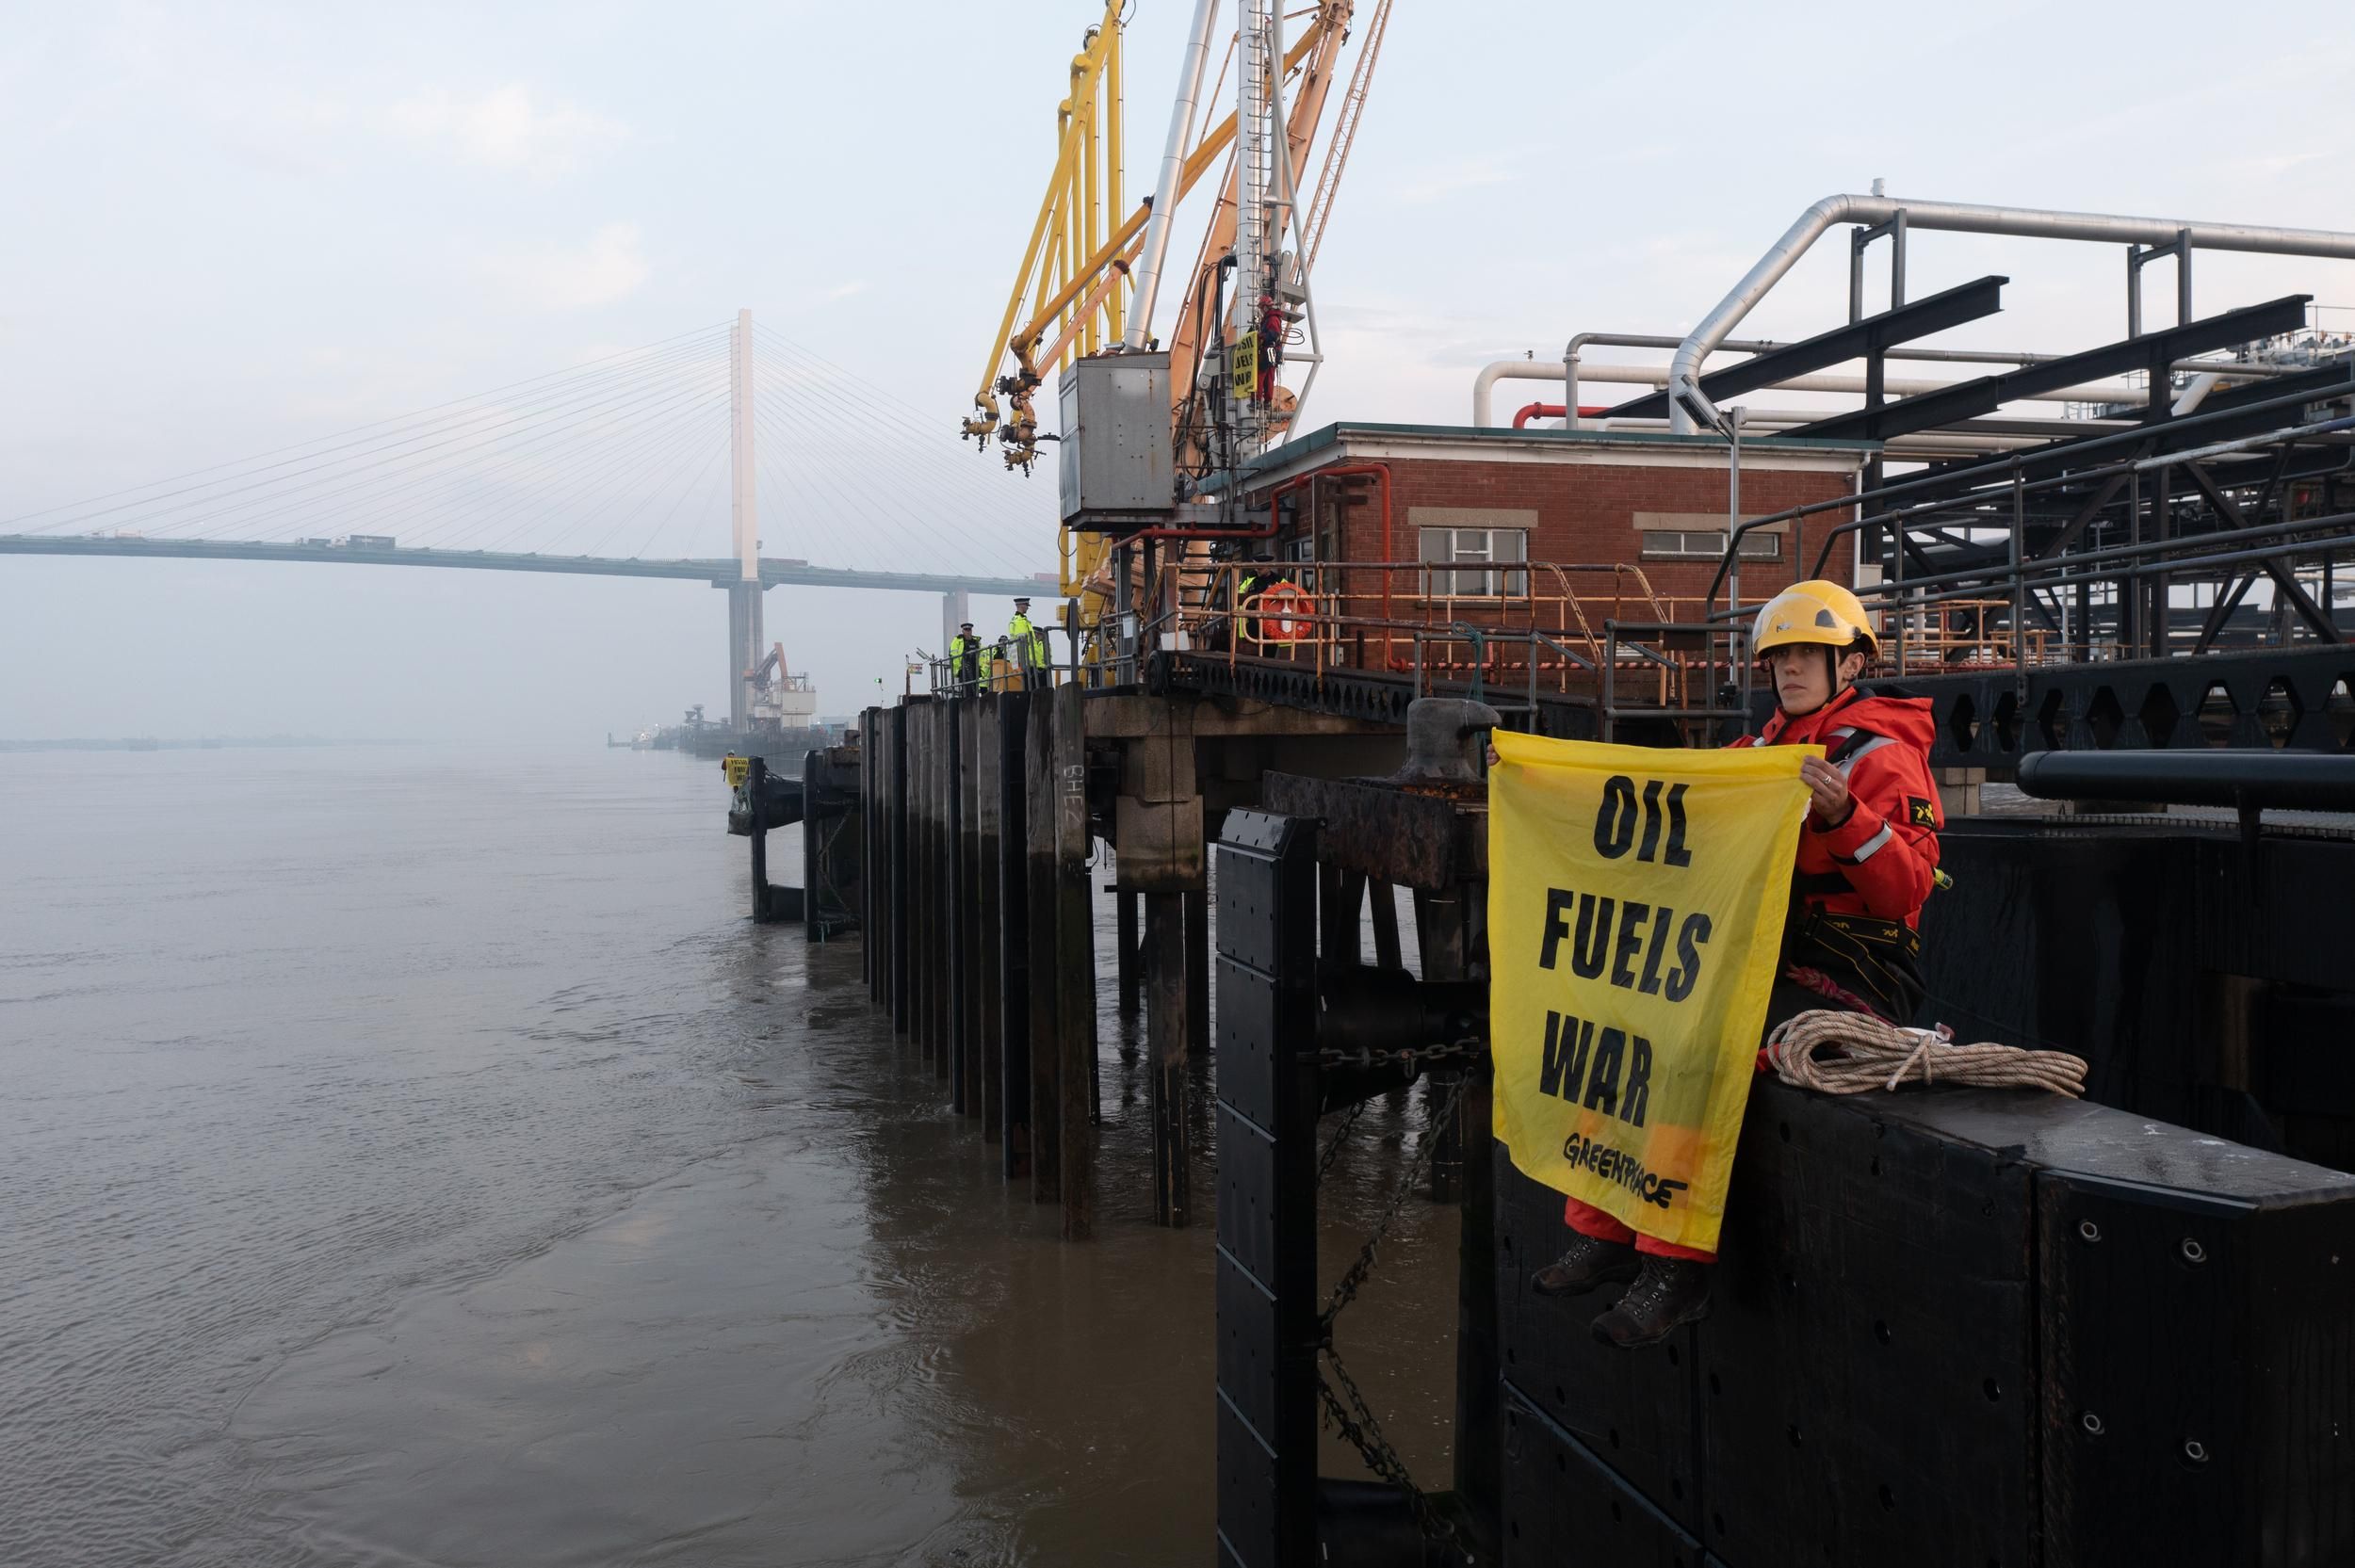 Greenpeace activists on the River Thames near London blocked a tanker carrying 33,000 tonnes of Russian diesel to the United Kingdom on May 16, 2022.